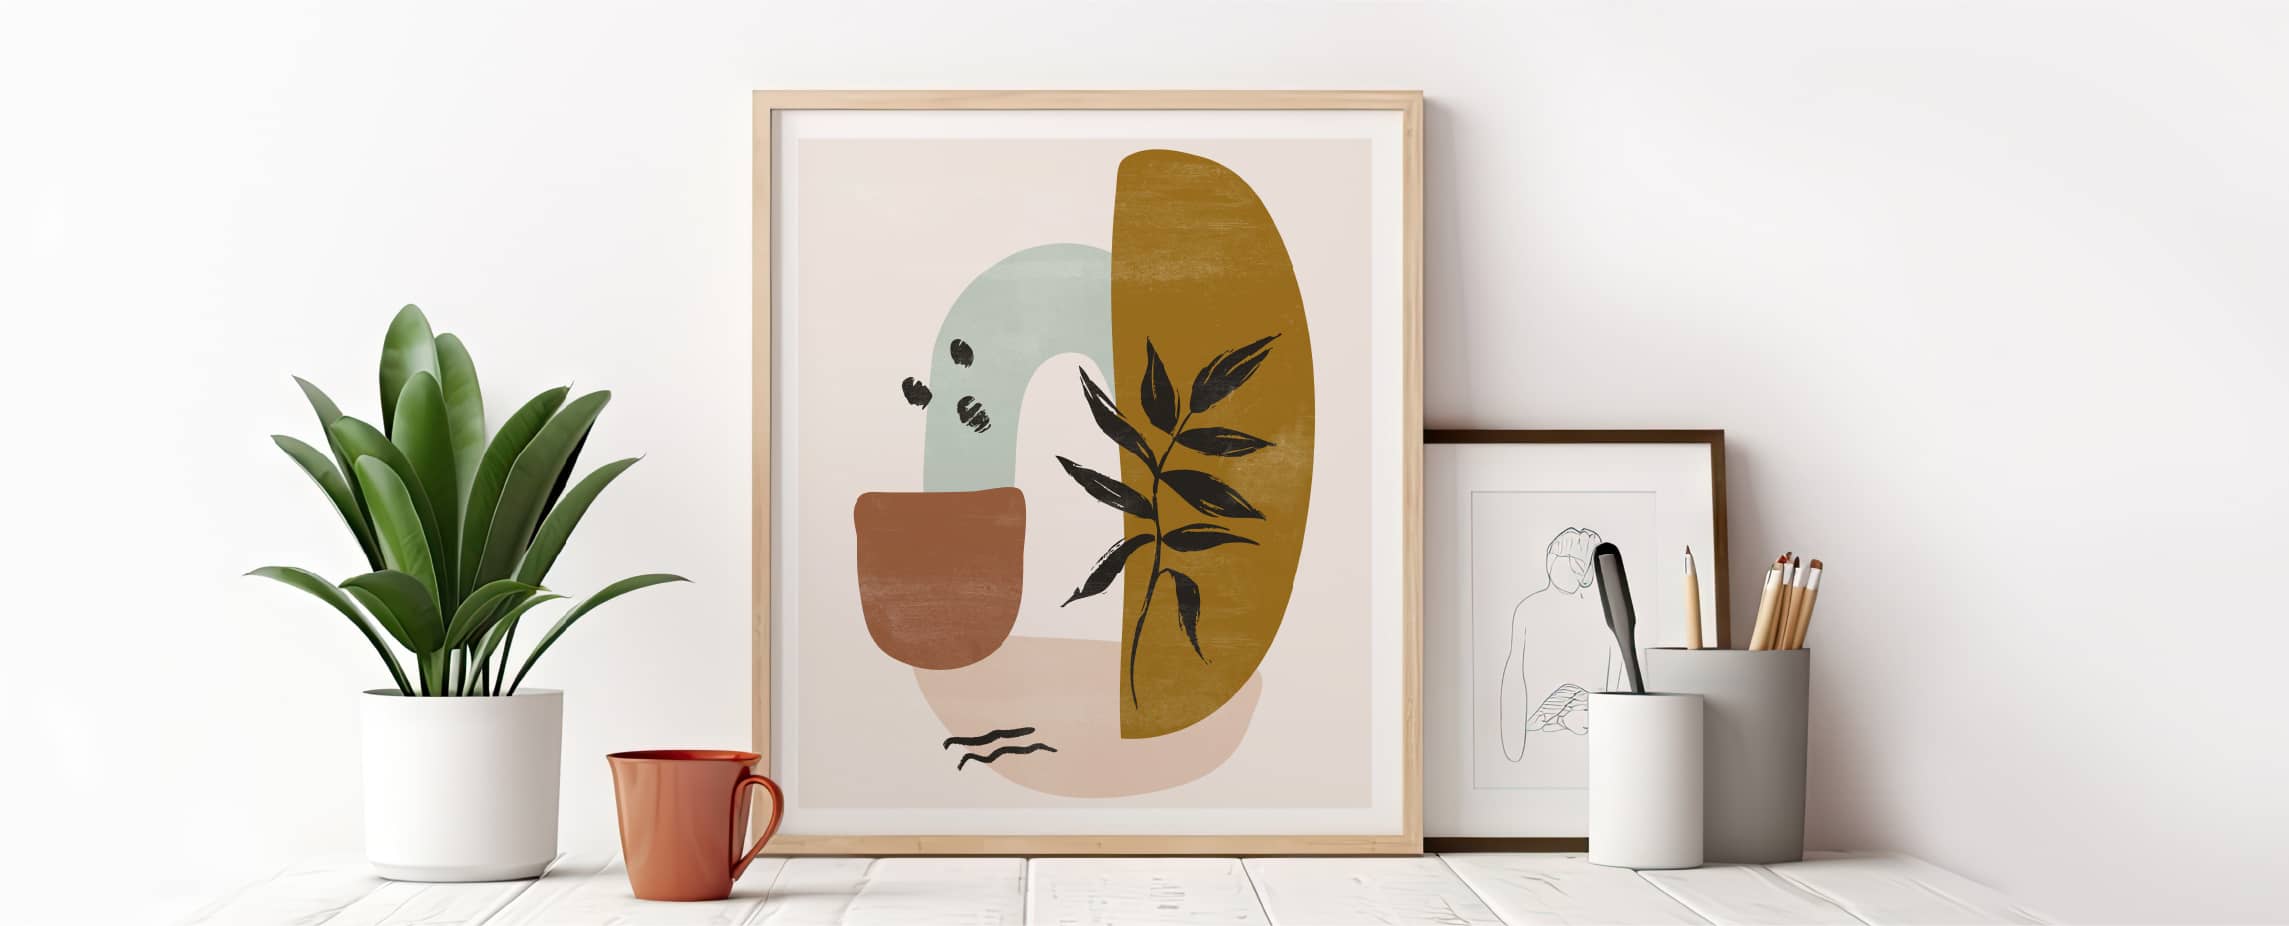 Geometric modern art framed surrounded by a framed abstract artwork, potted plant, and cup of pencils.